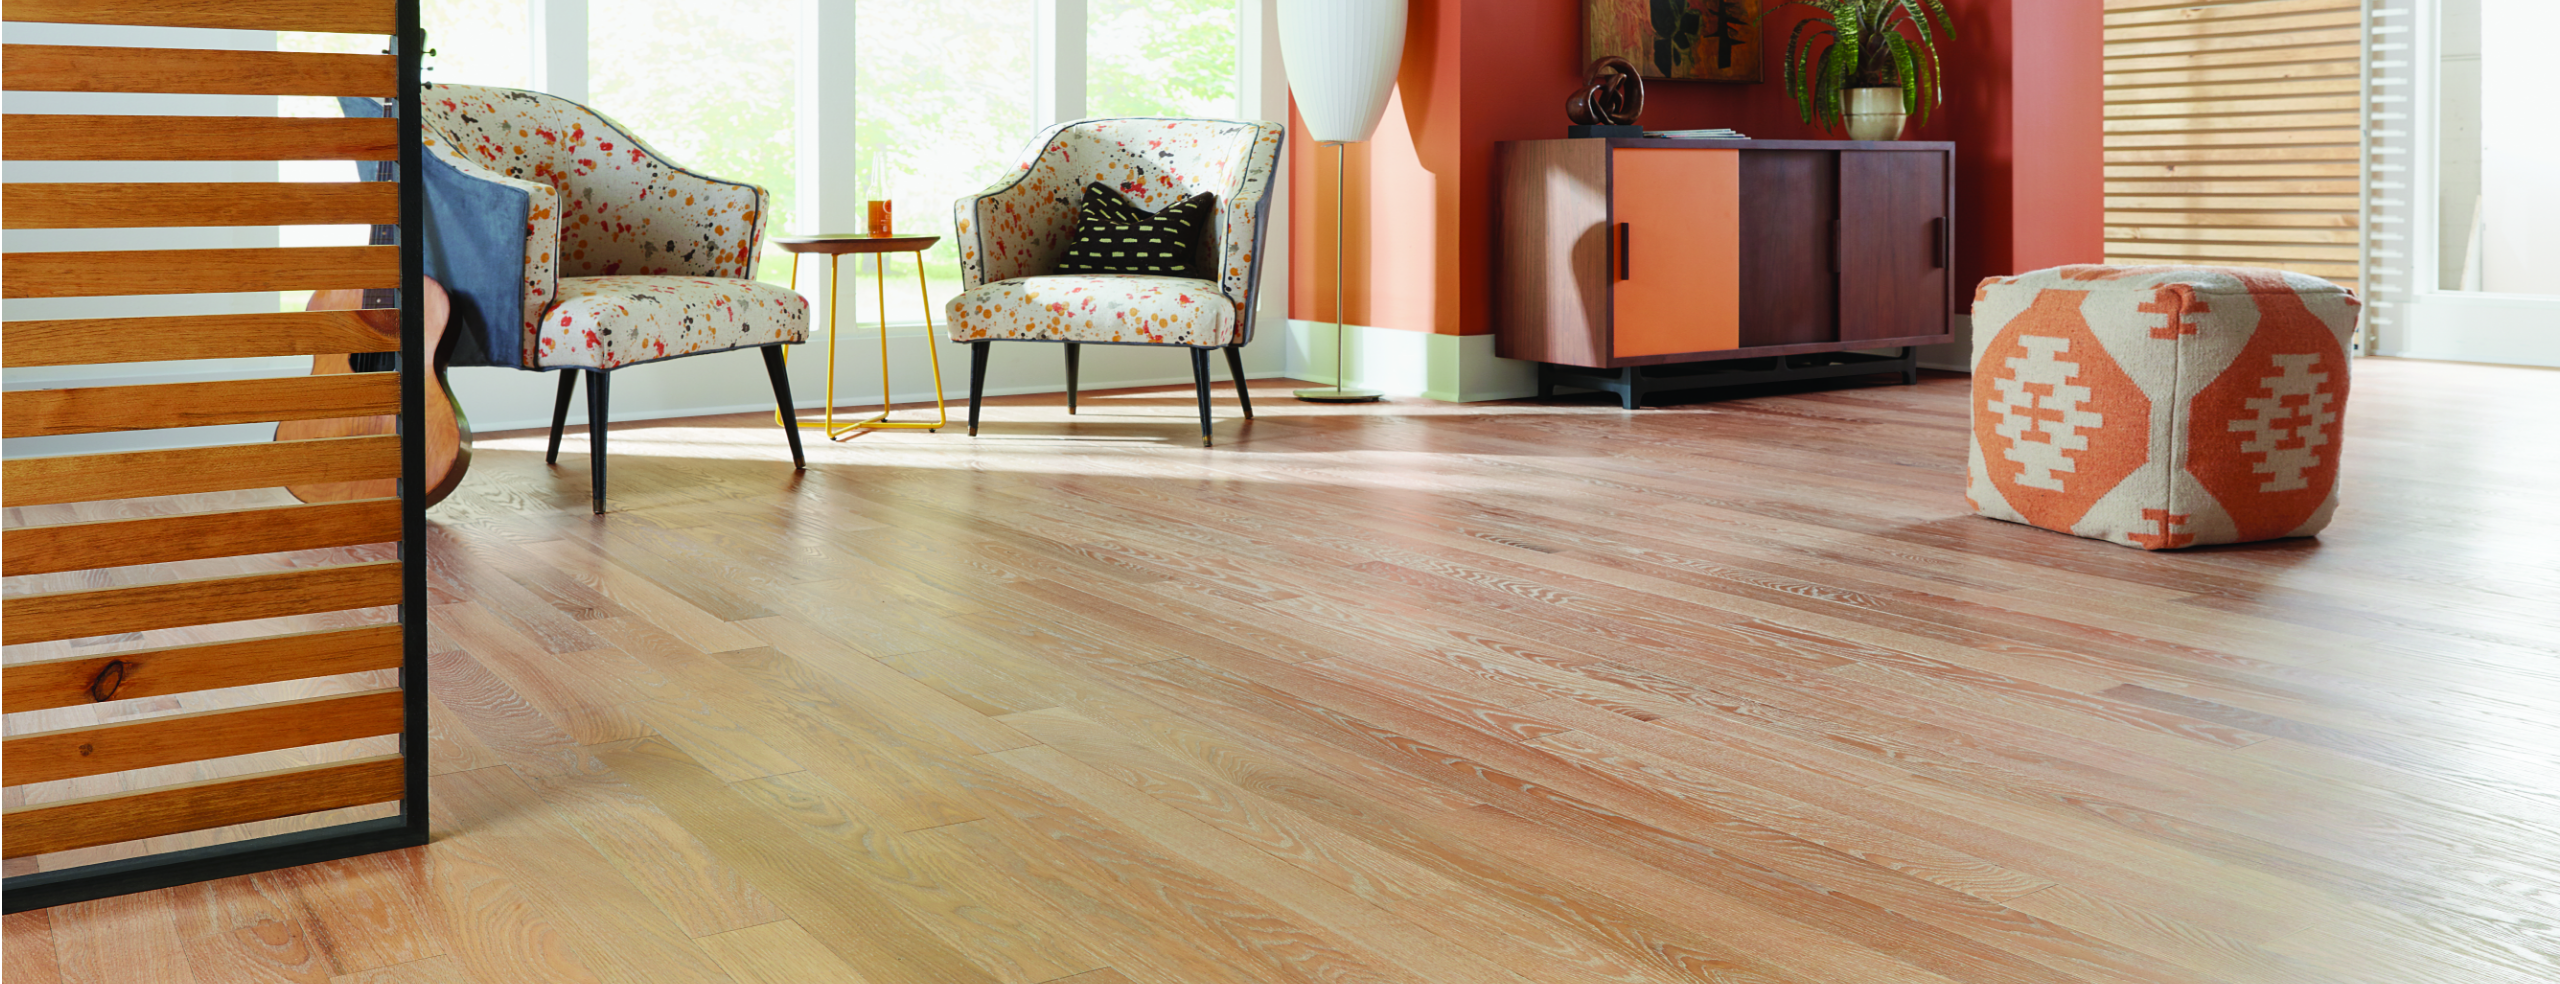 How to Clean and Maintain Oiled Wood Floors - Bona.com